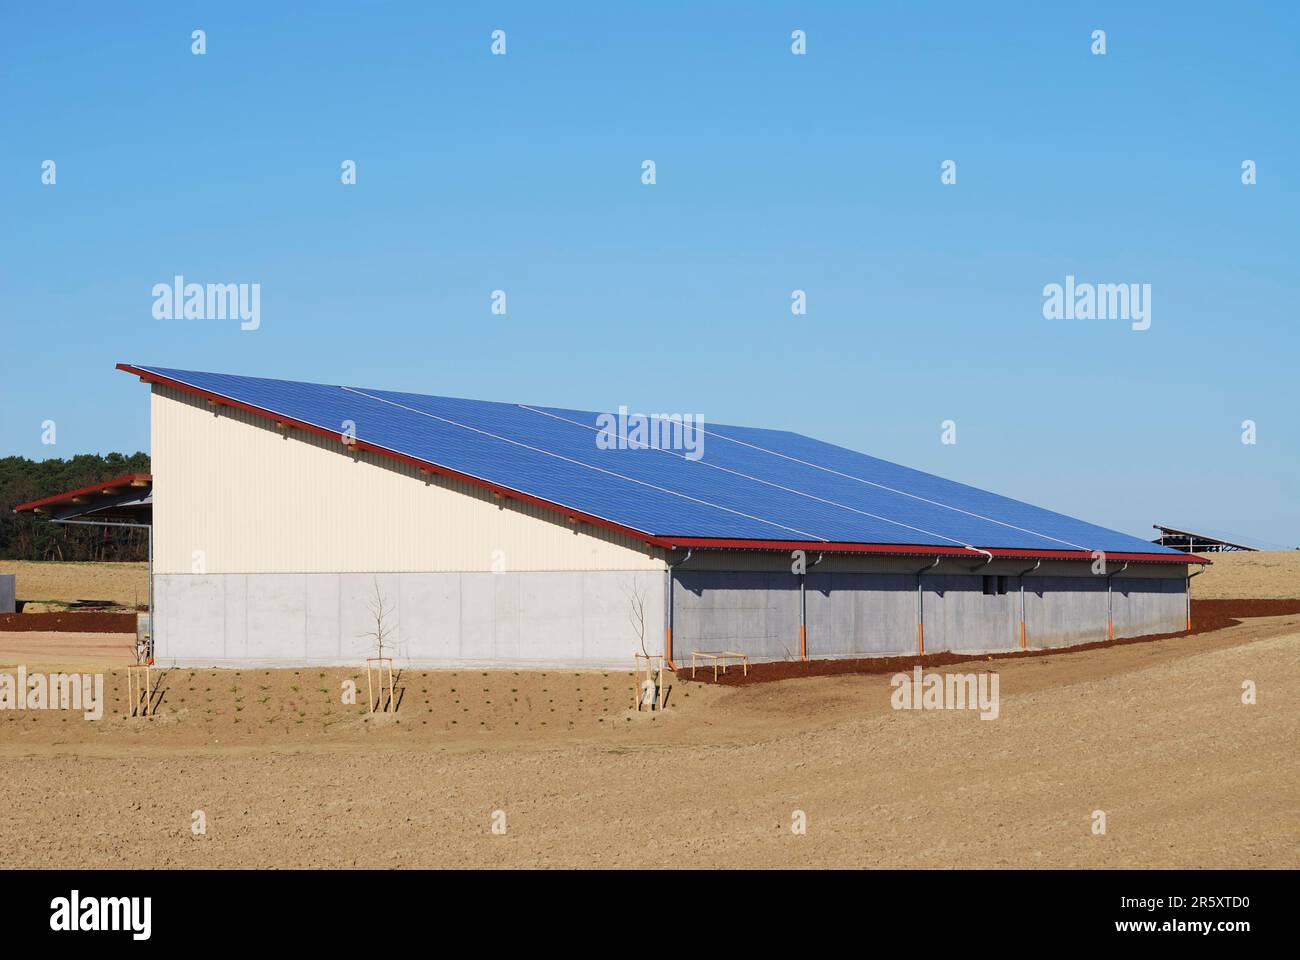 Soar energy creation on a storage building Stock Photo